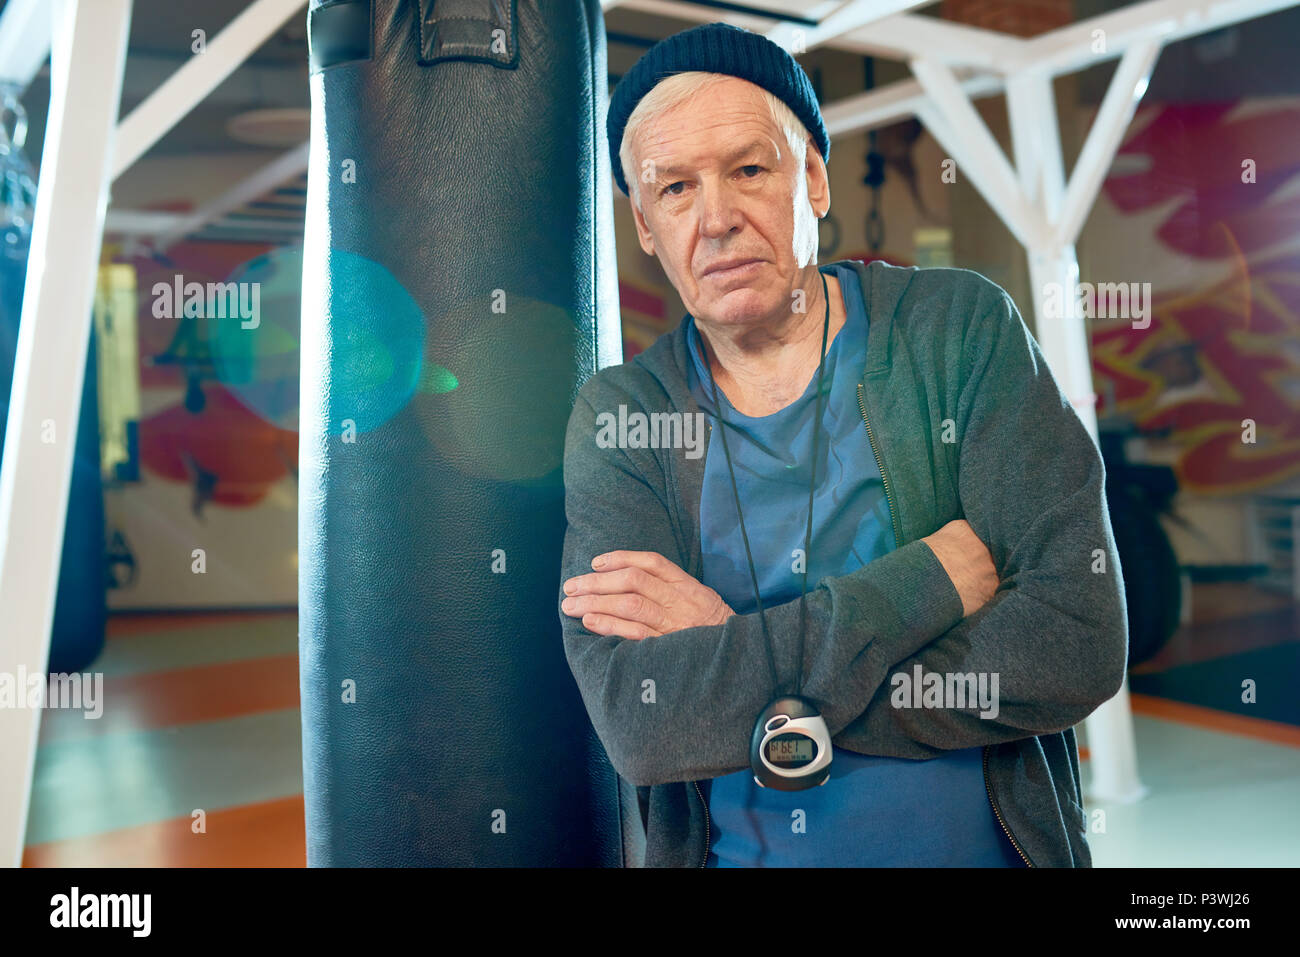 Professional trainer in boxing gym Stock Photo